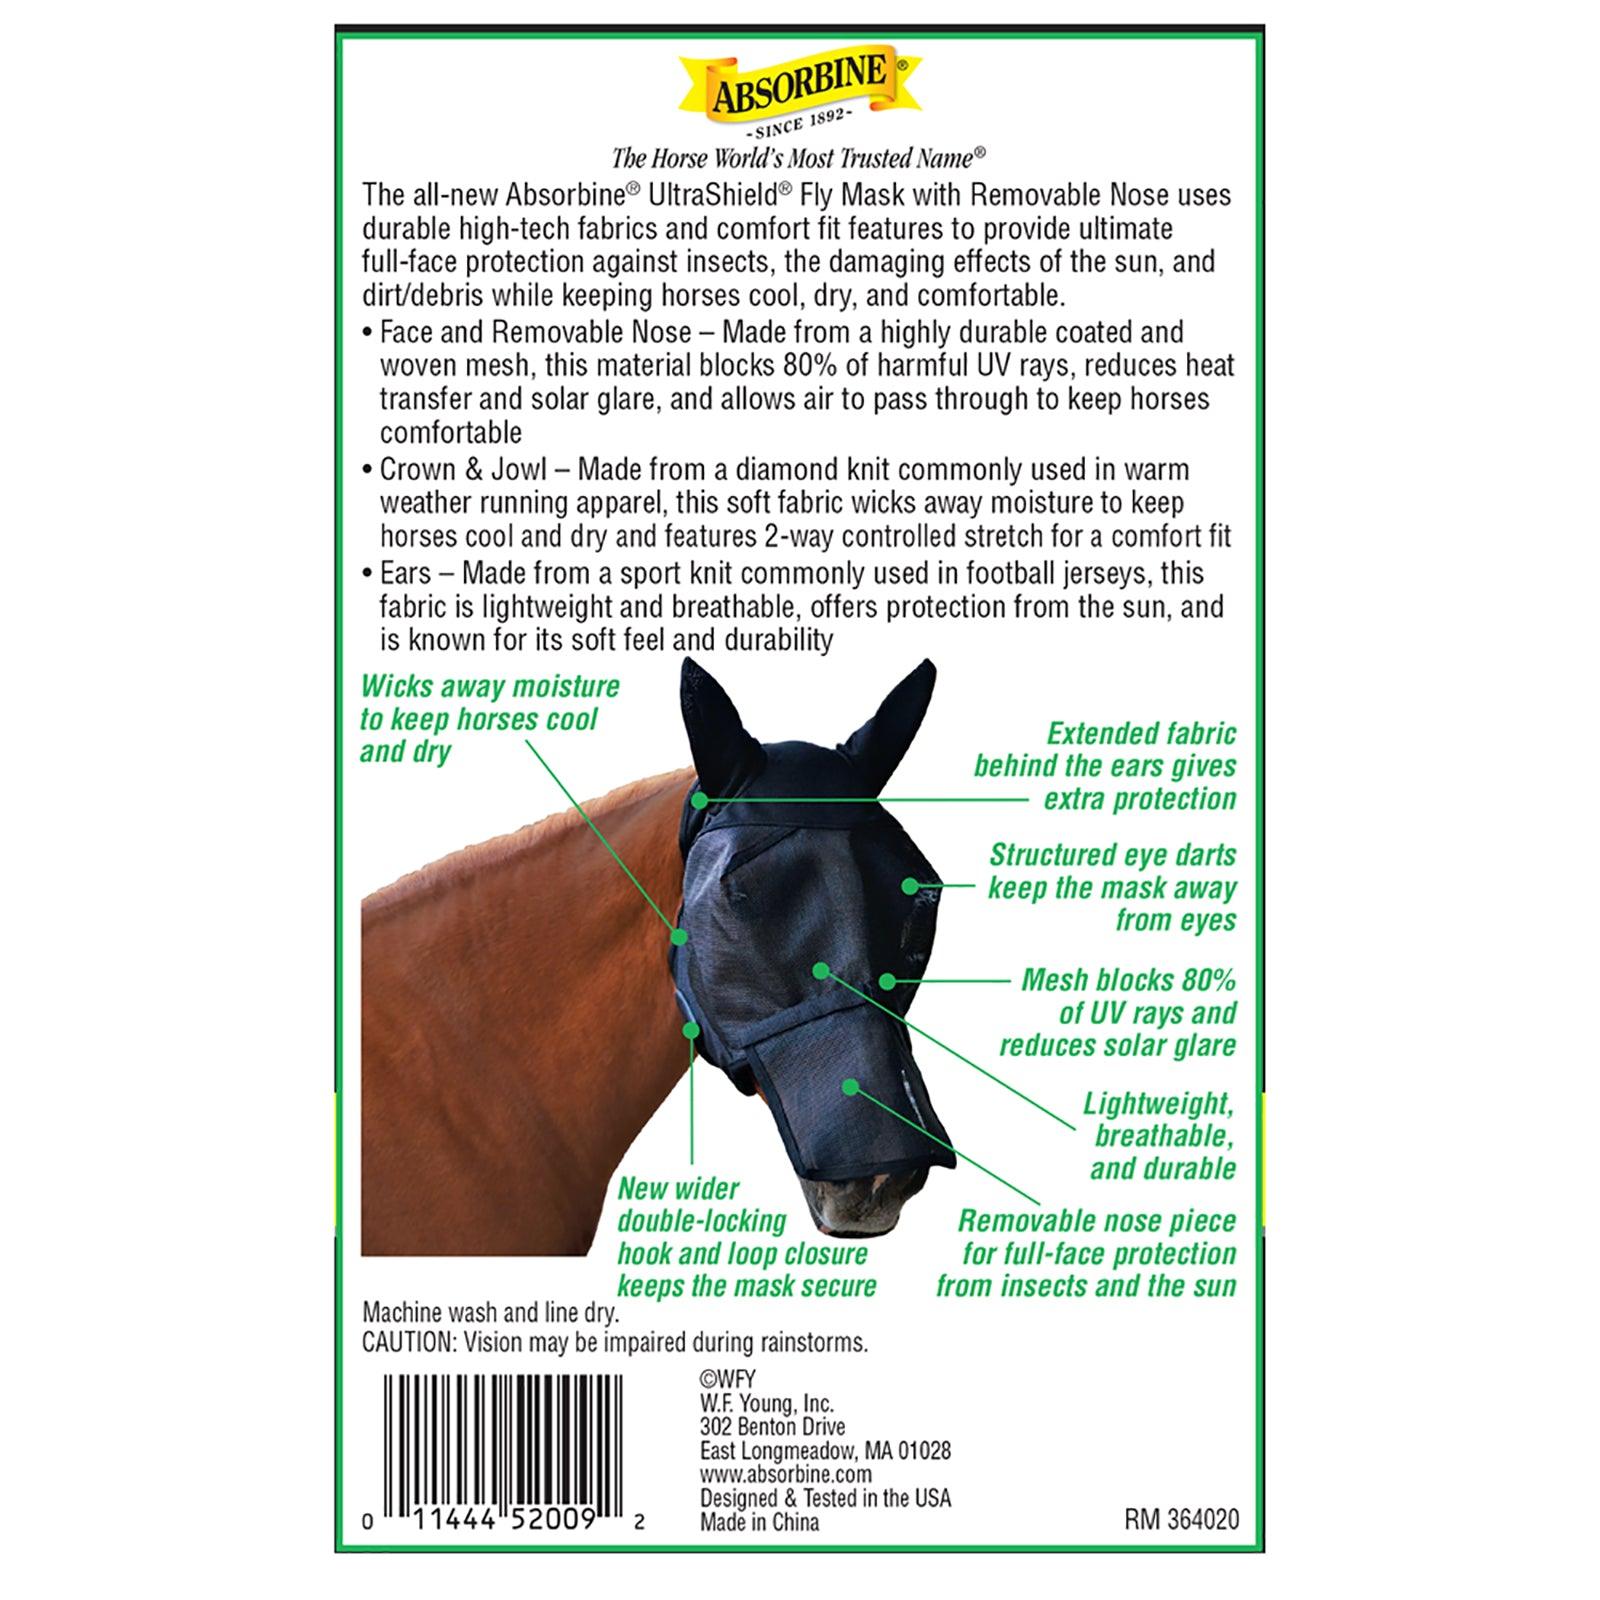 Back label of the UltraShield flymask showing all the spots where UltraShield fly mask with removable nose excels over the competition.